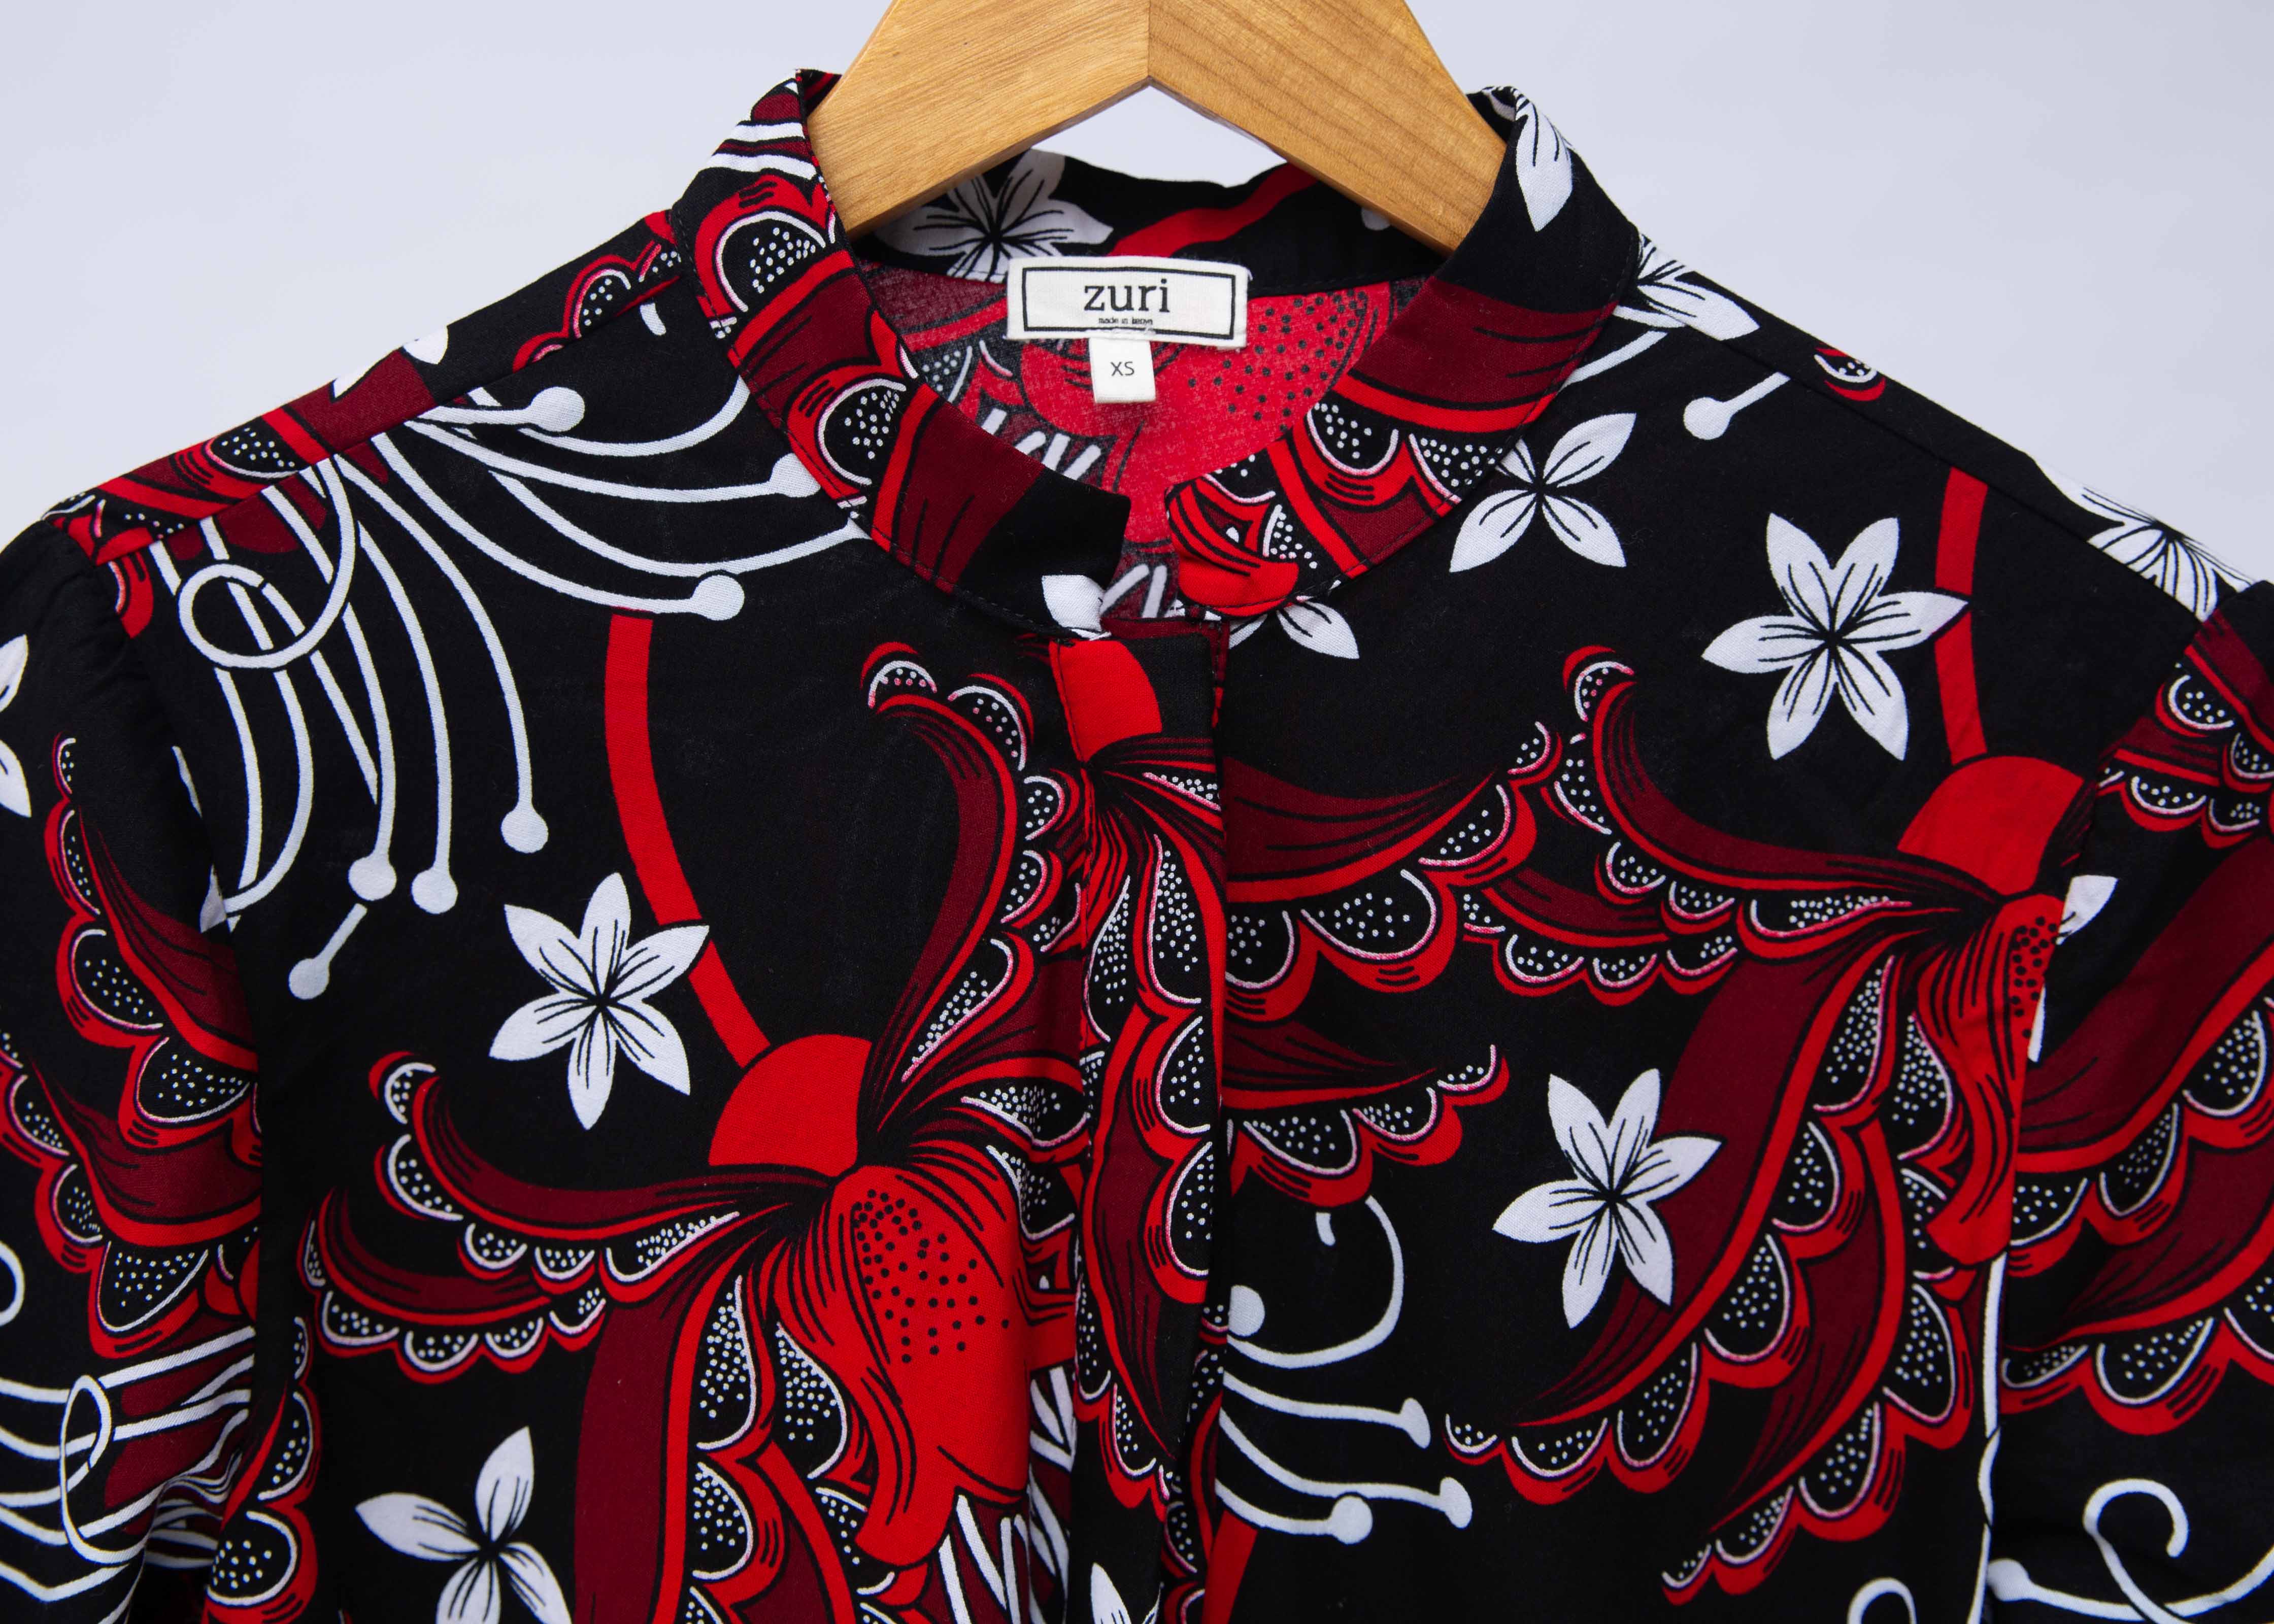 Display of black dress with red and white flowers.